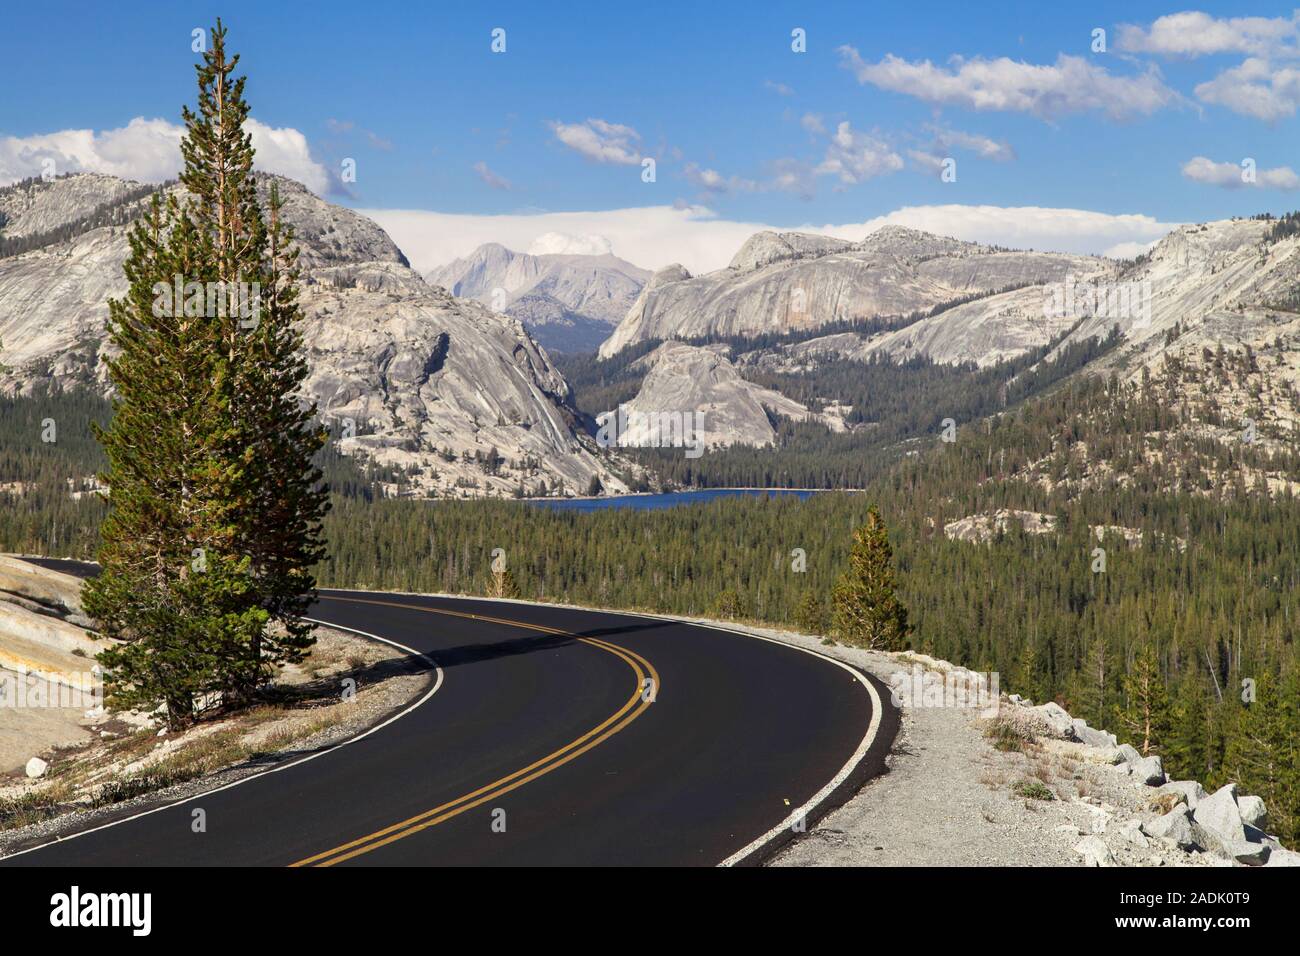 Tioga Pass Road durch Olmsted Point, Yosemite National Park, Kalifornien, USA. Stockfoto